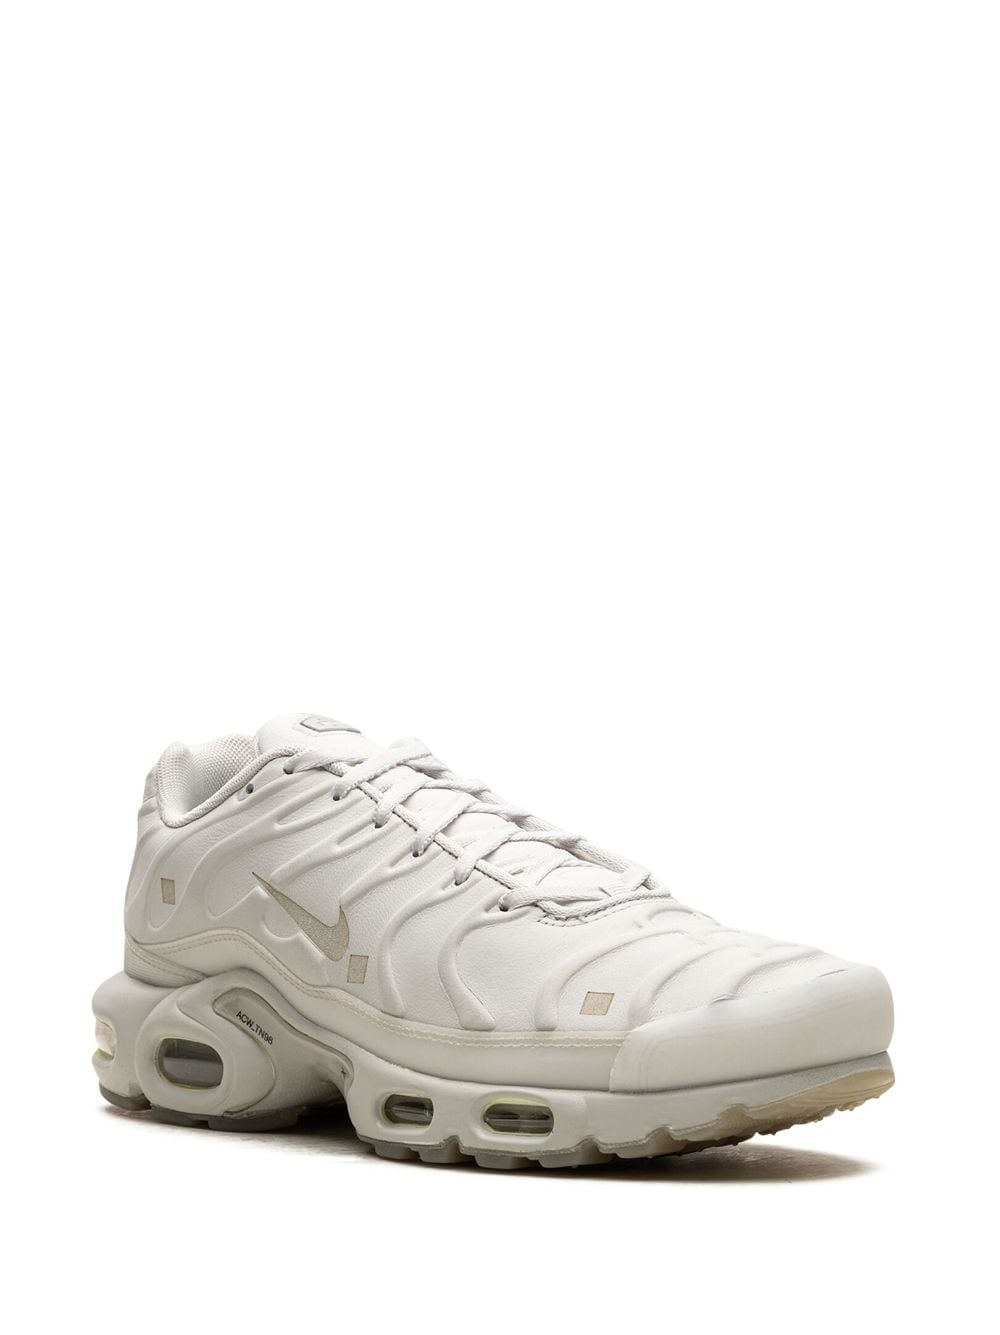 Nike x A-COLD-WALL* Air Max Plus sneakers White